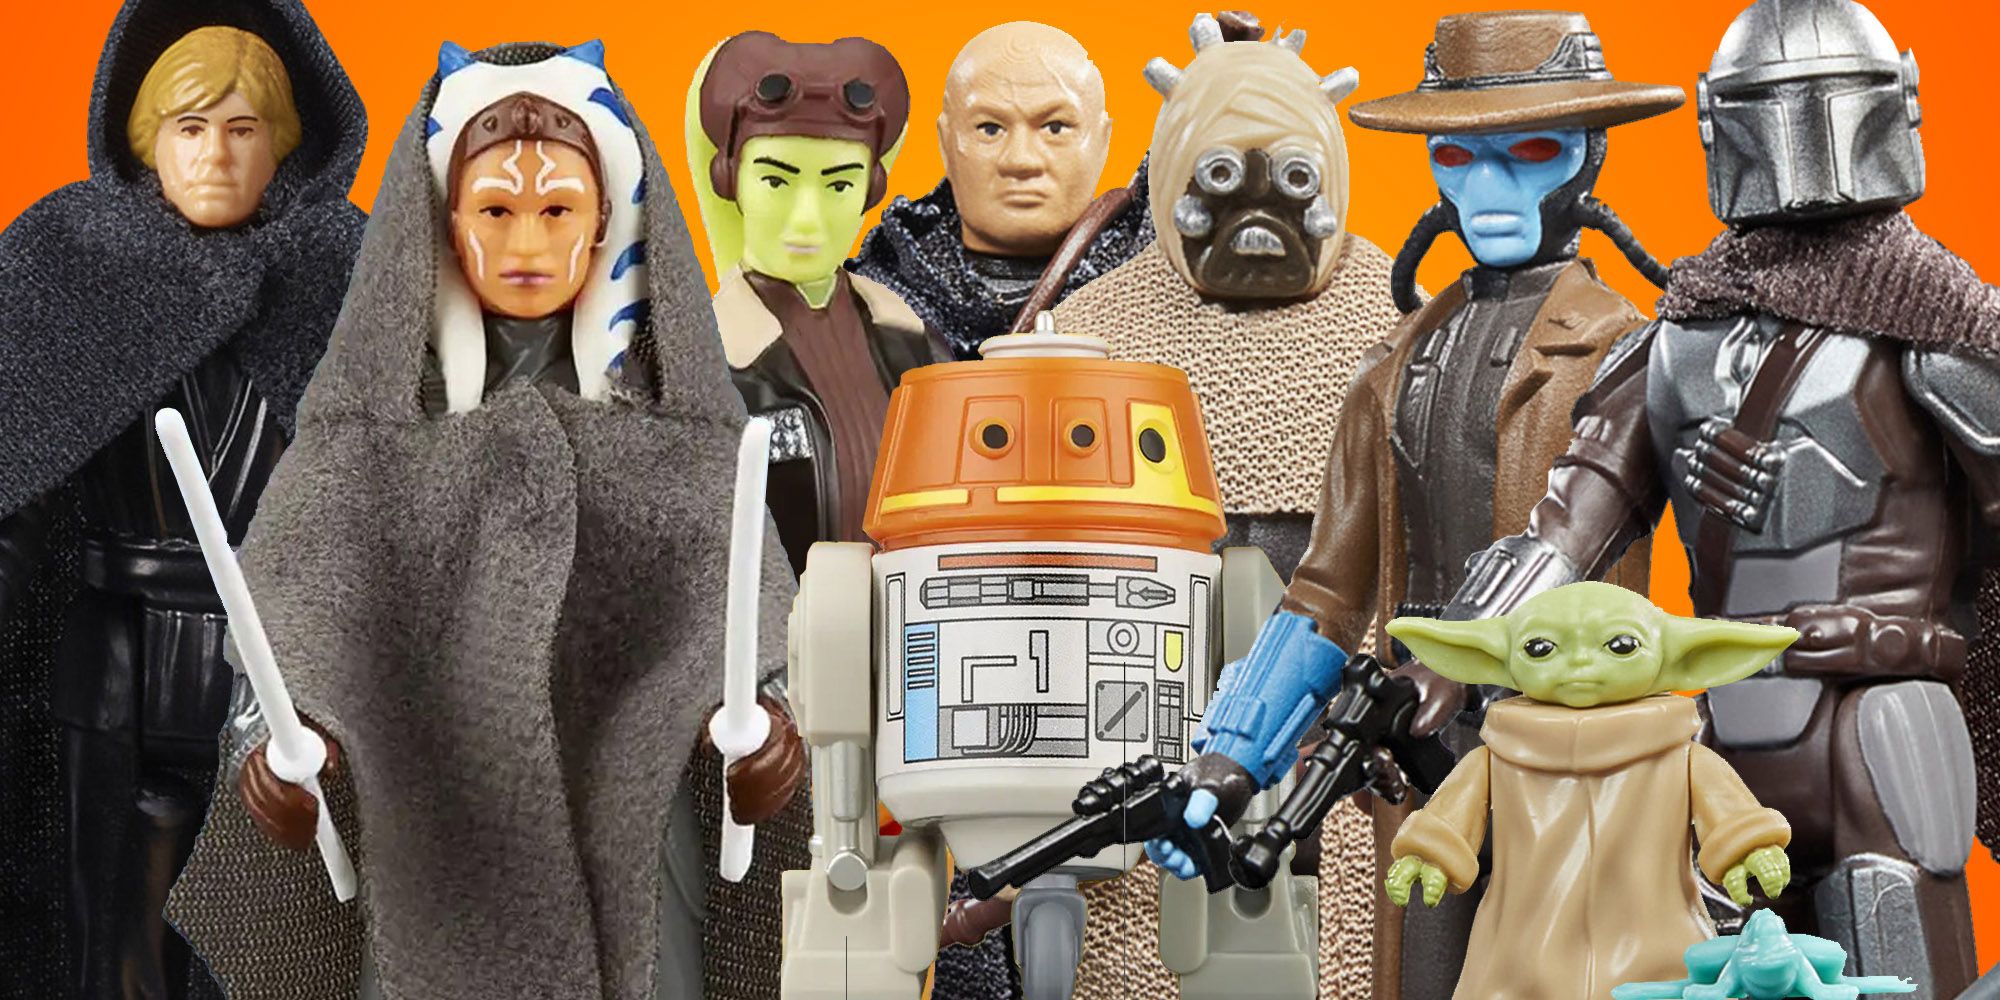 Hasbro Retro Collection figures featuring characters from Ahsoka and The Book of Boba Fett